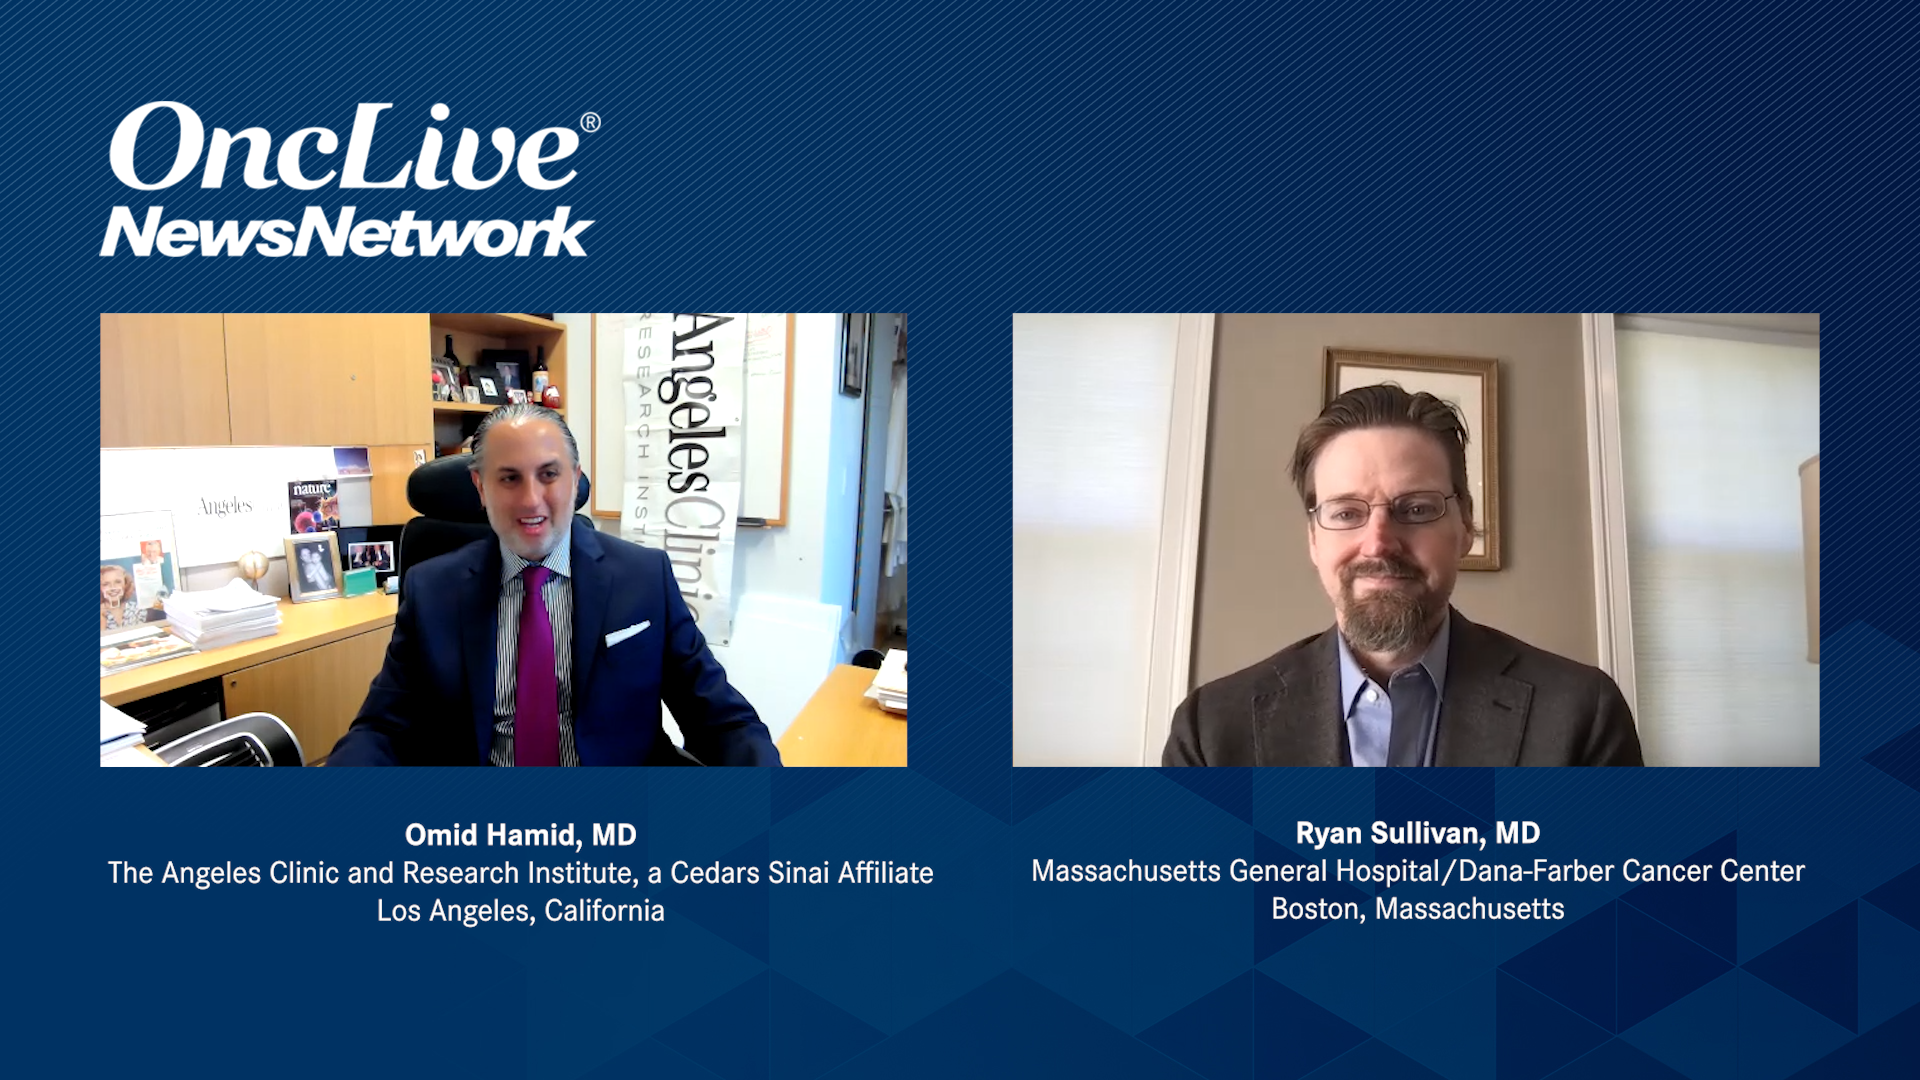 Omid Hamid, MD, and Ryan Sullivan, MD, smiling at the camera. Both are in their offices.